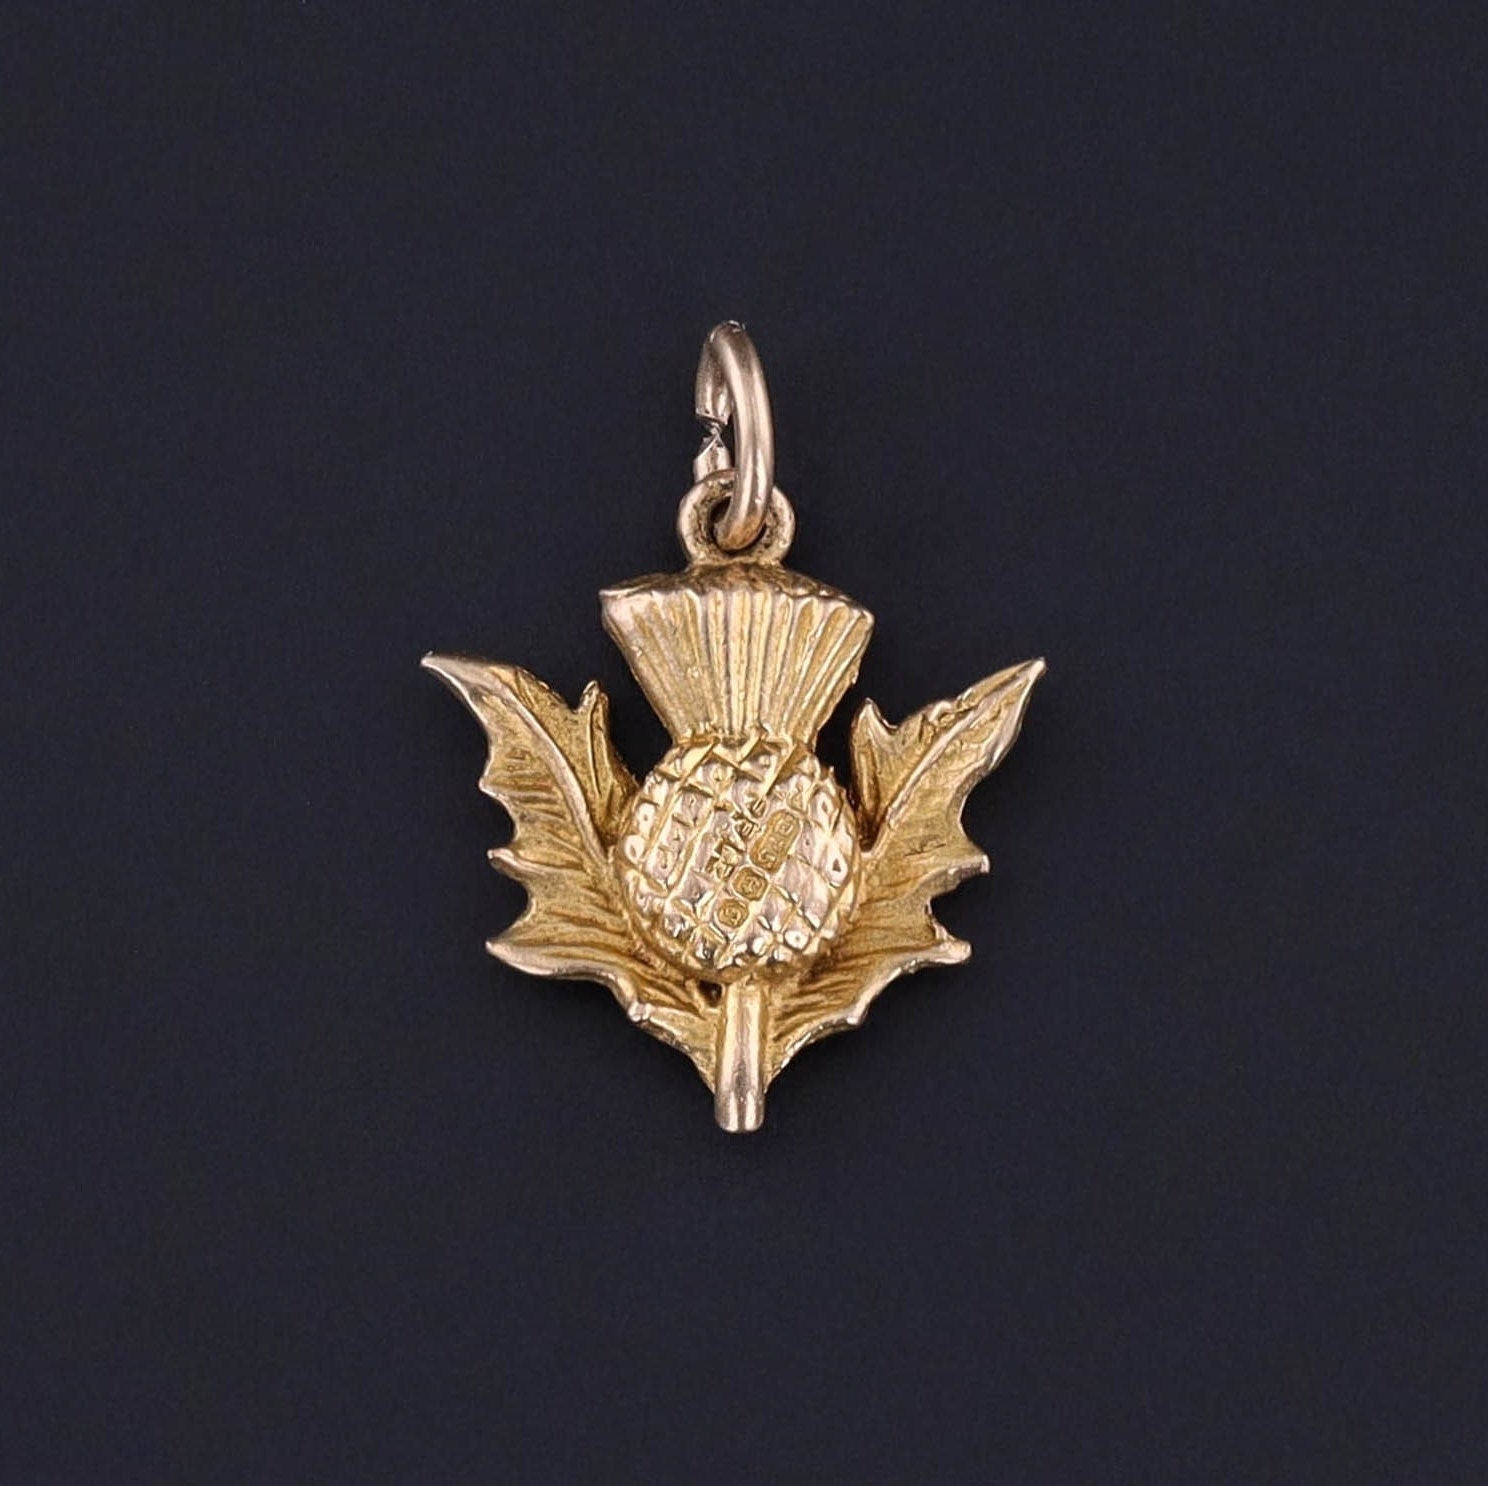 The front of our antique thistle charm. This 1920s thistle charm is made of 10k gold and in very good condition.